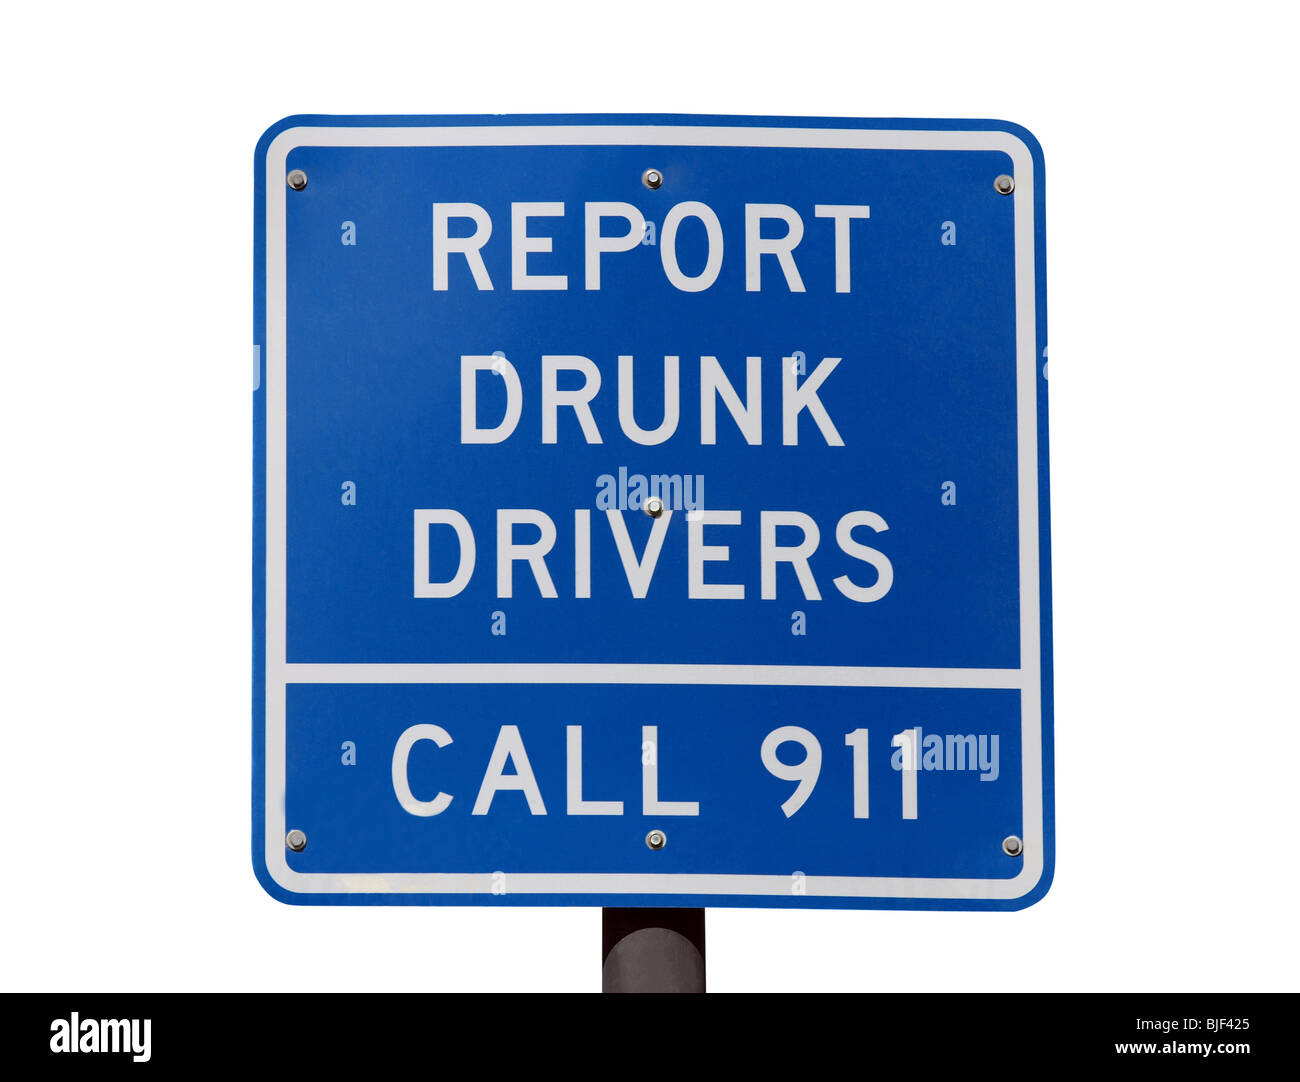 Report drunk drivers, call 911 highway sign. Stock Photo